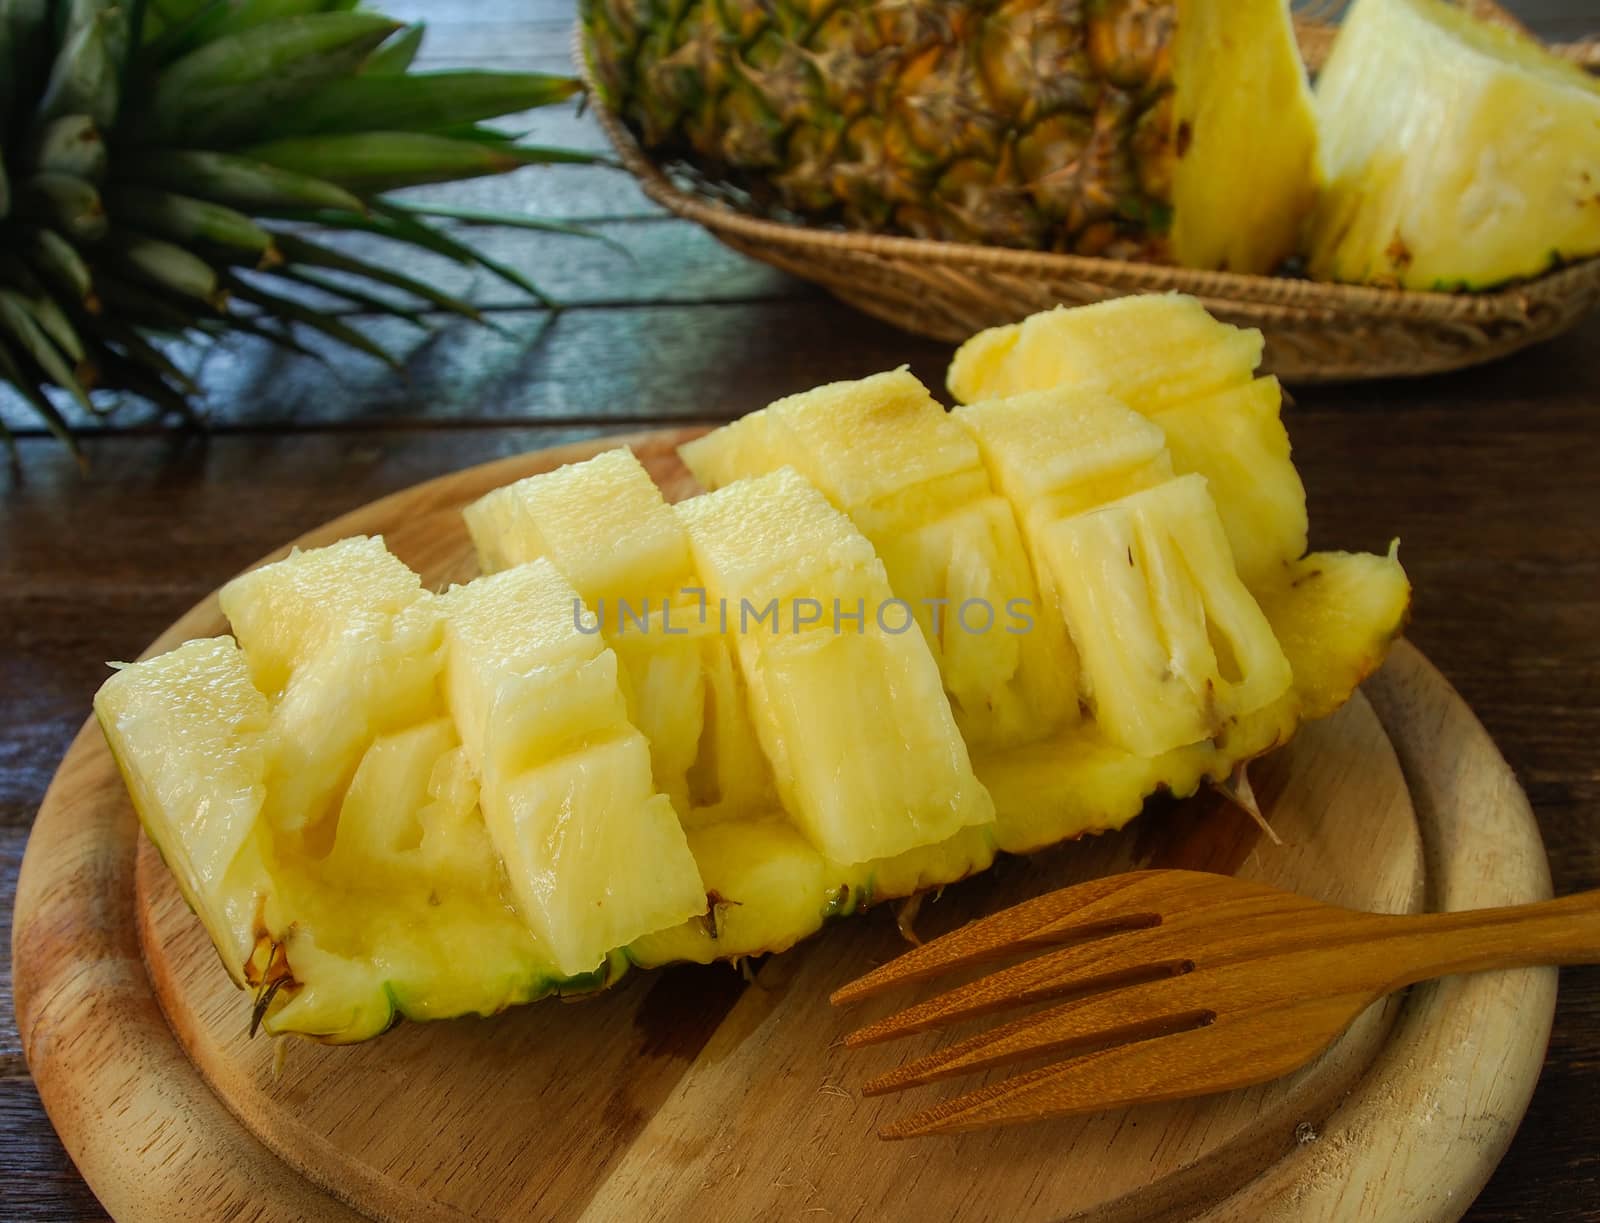 pineapple slices prepared, served on wooden plates.